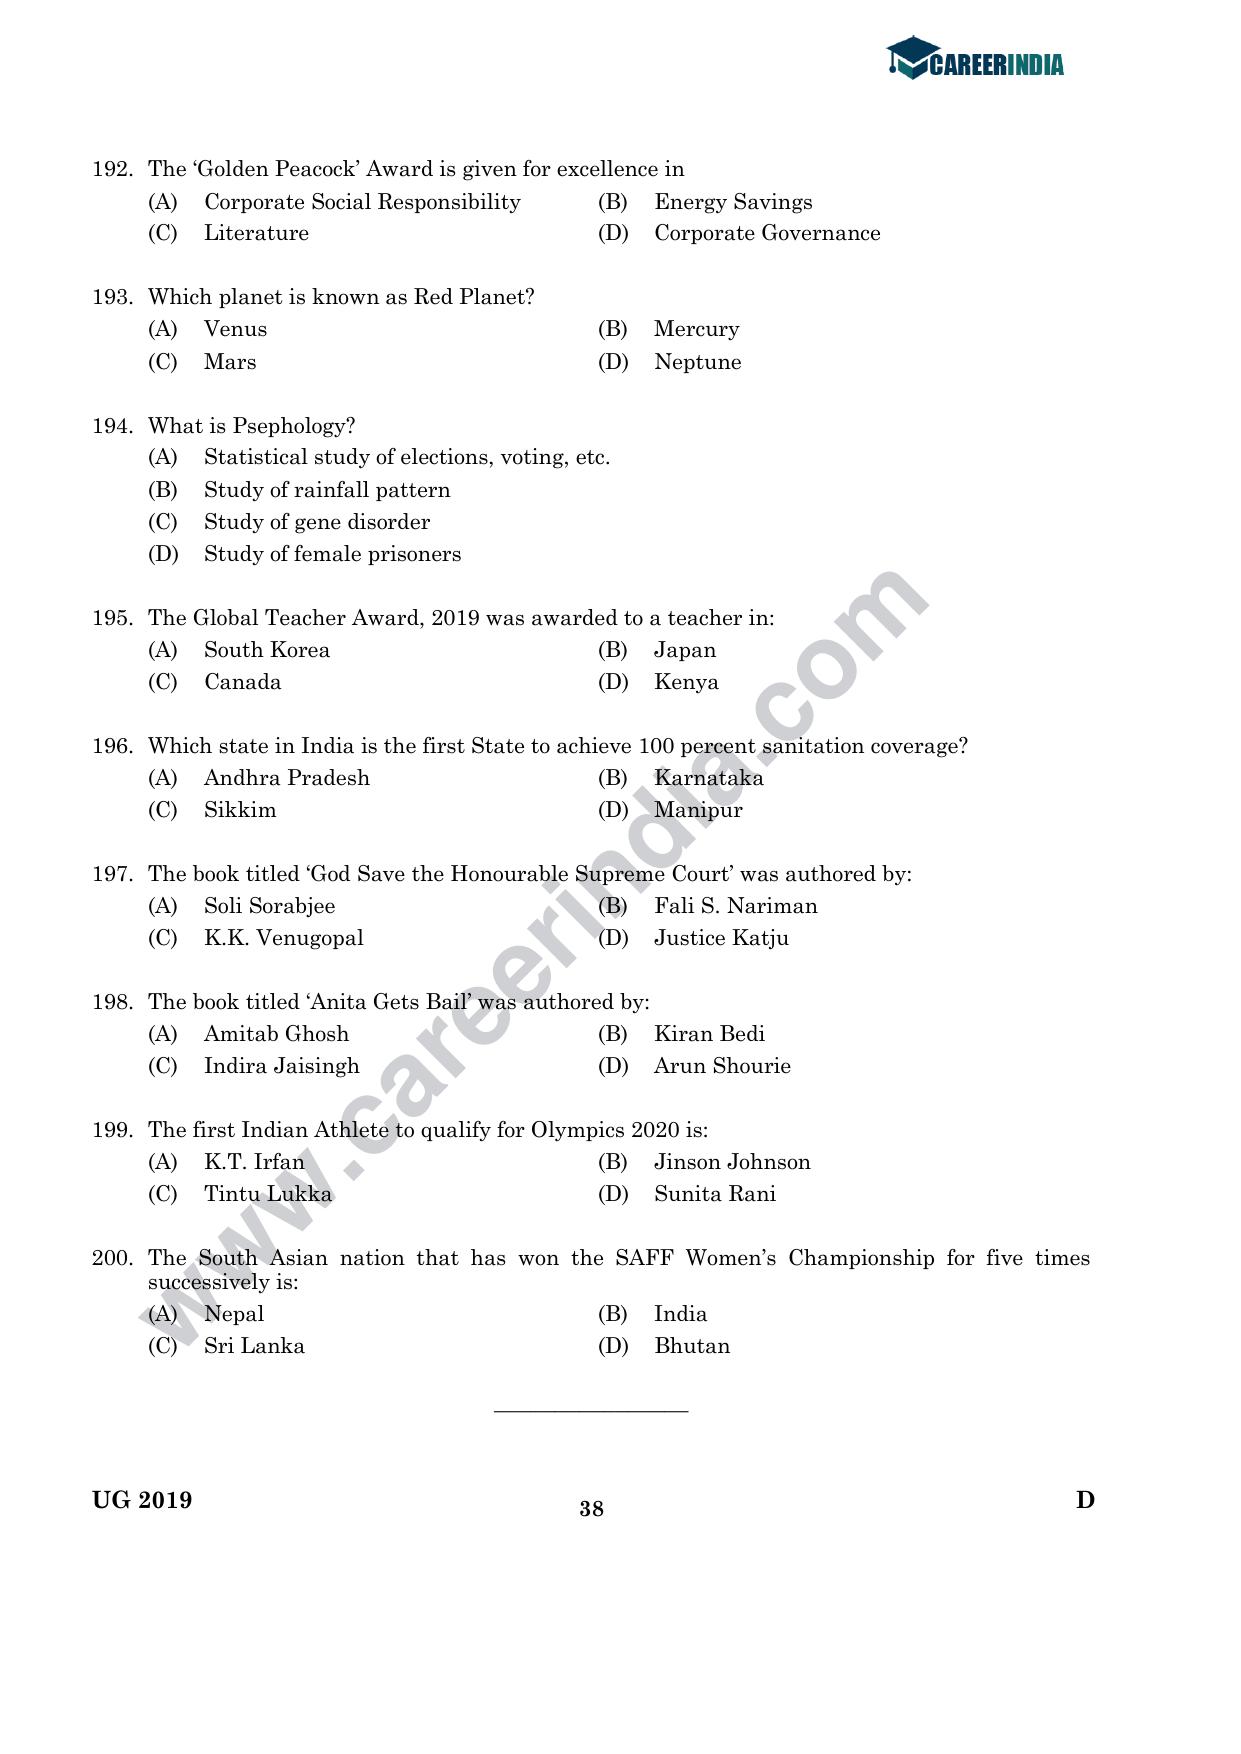 CLAT 2019 UG Logical-Reasoning Question Paper - Page 37